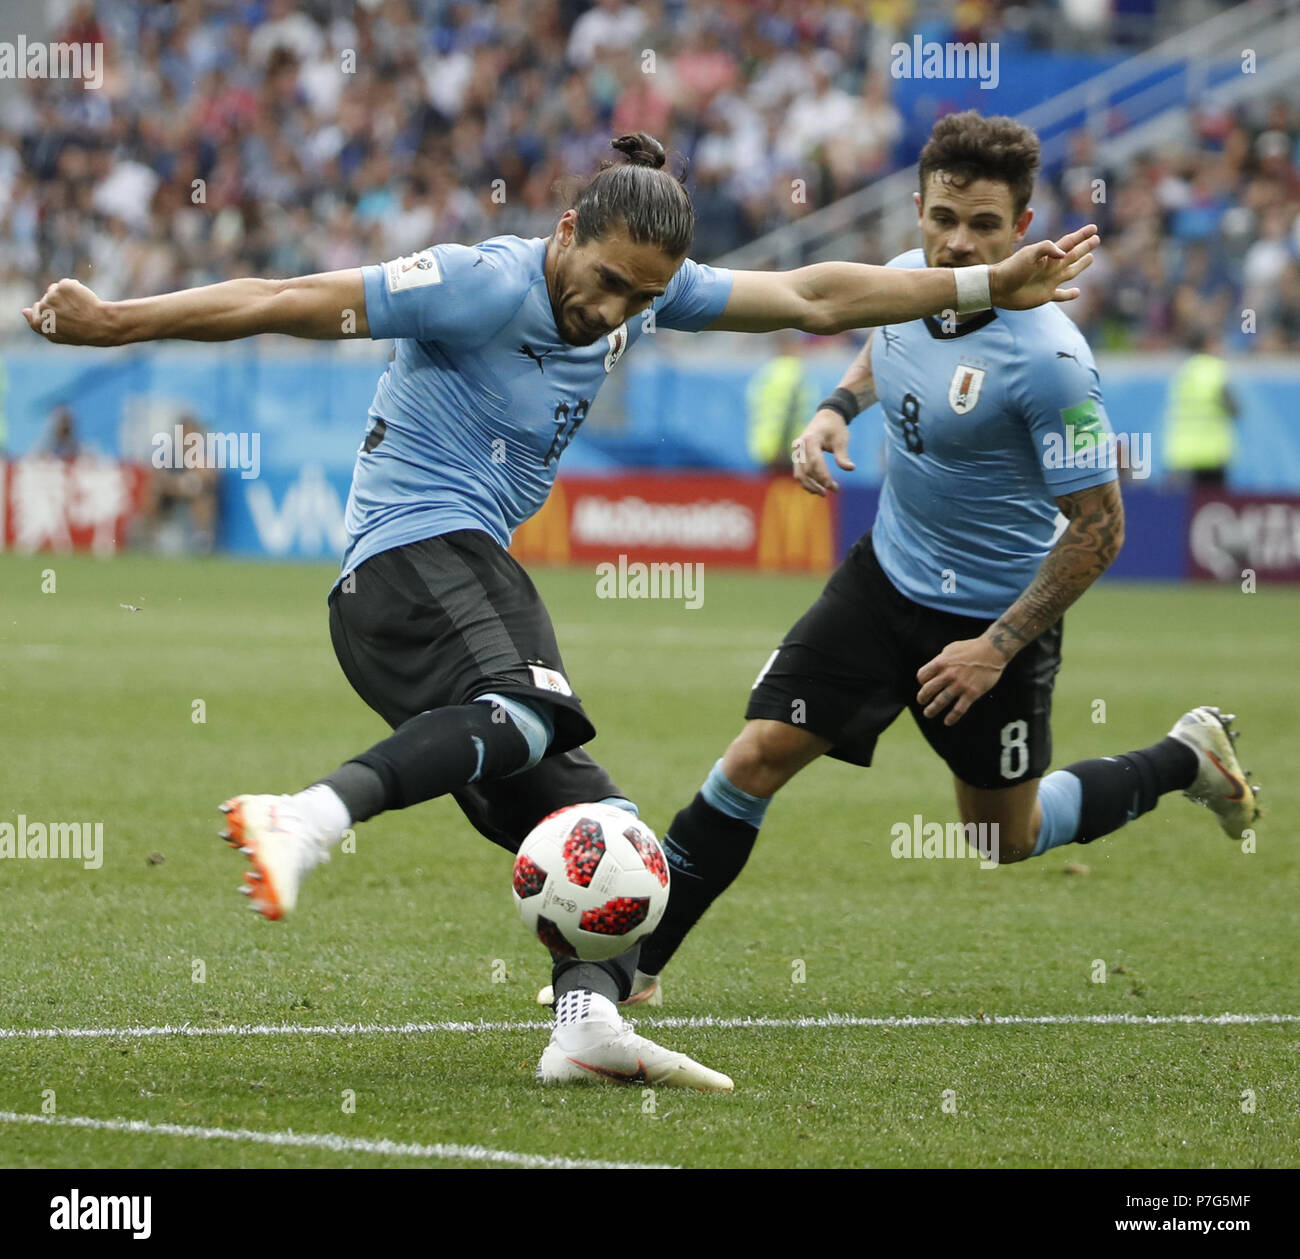 Nizhny Novgorod, Russia. 6th July, 2018. Martin Caceres (L) of Uruguay competes during the 2018 FIFA World Cup quarter-final match between Uruguay and France in Nizhny Novgorod, Russia, July 6, 2018. France won 2-0 and advanced to the semi-finals. Credit: Ye Pingfan/Xinhua/Alamy Live News Stock Photo